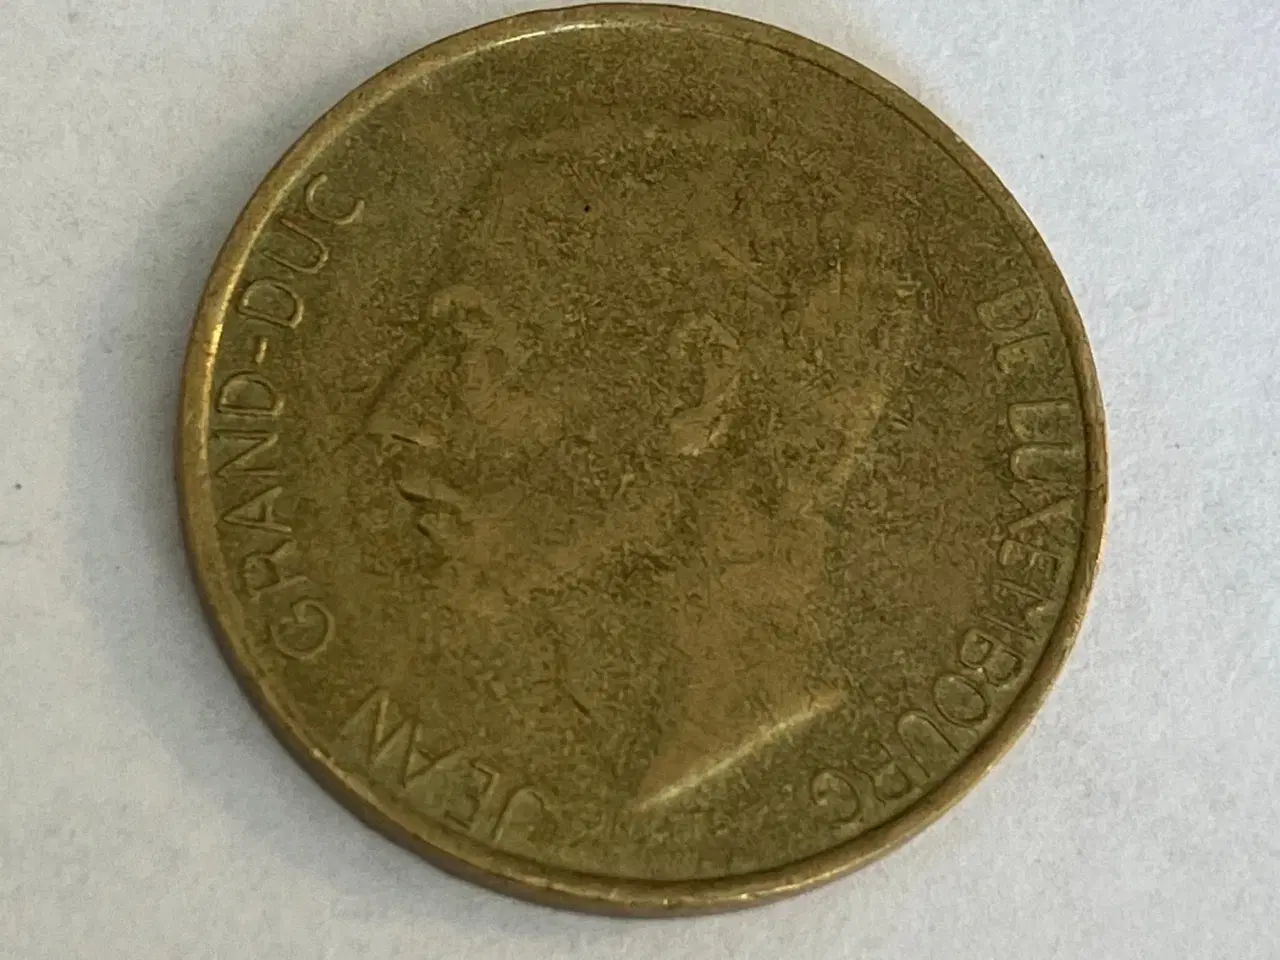 Billede 2 - 5 Francs Luxembourg 1990